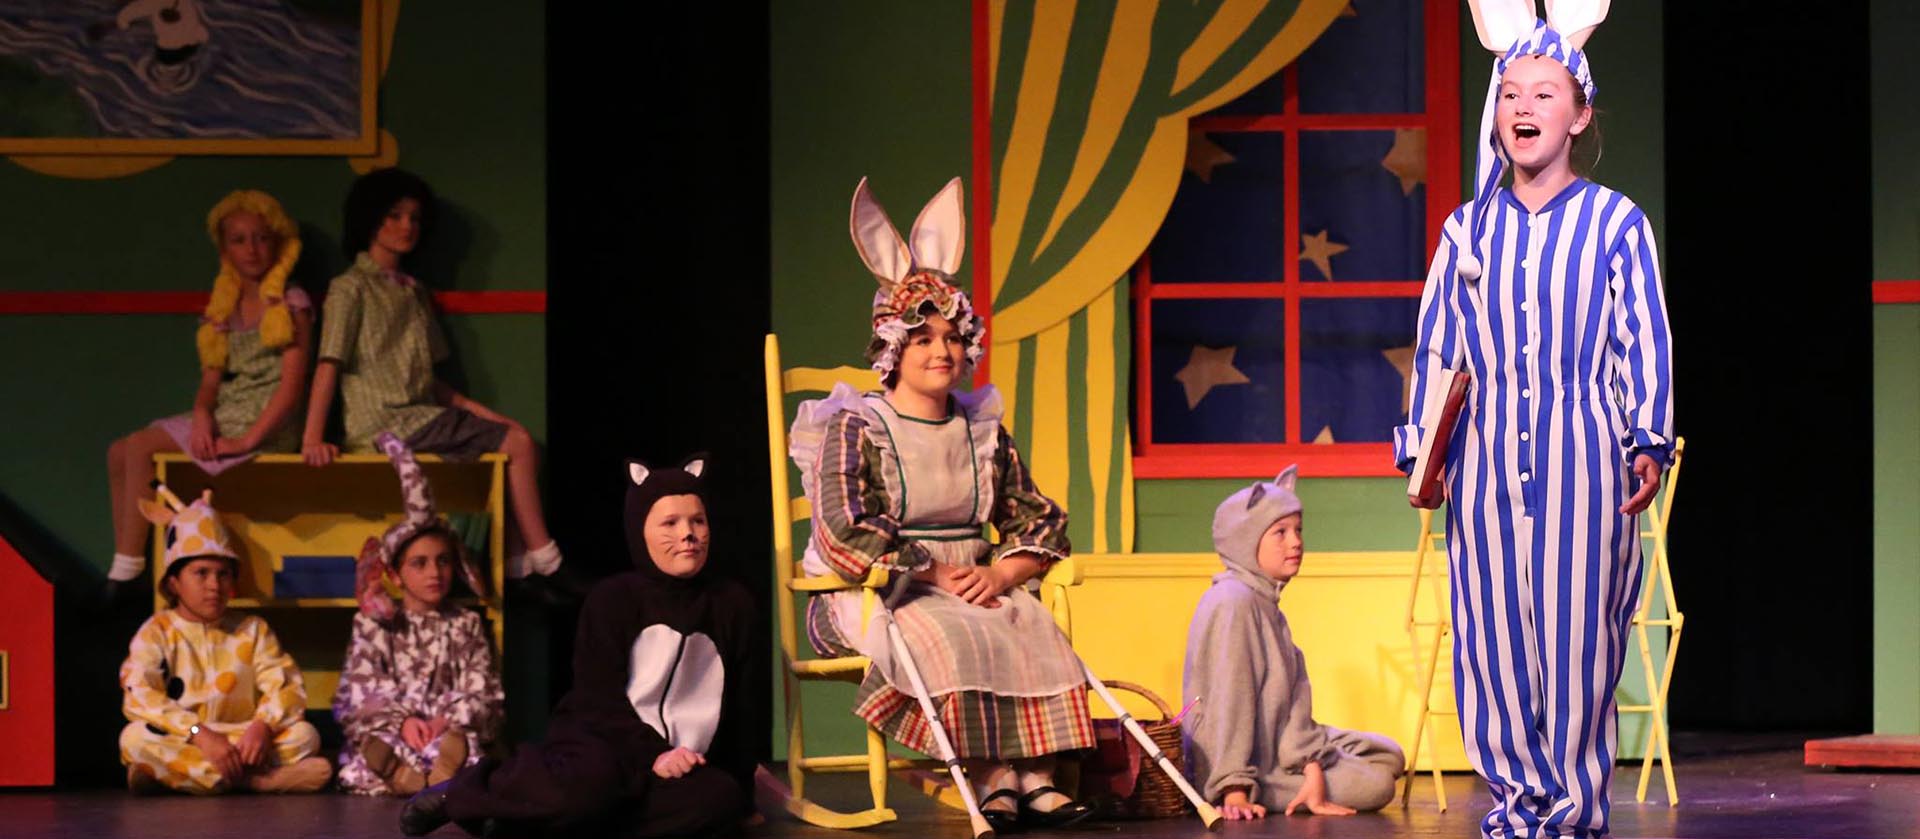 A group of young performers in costume performing a scene from Goodnight Mood.